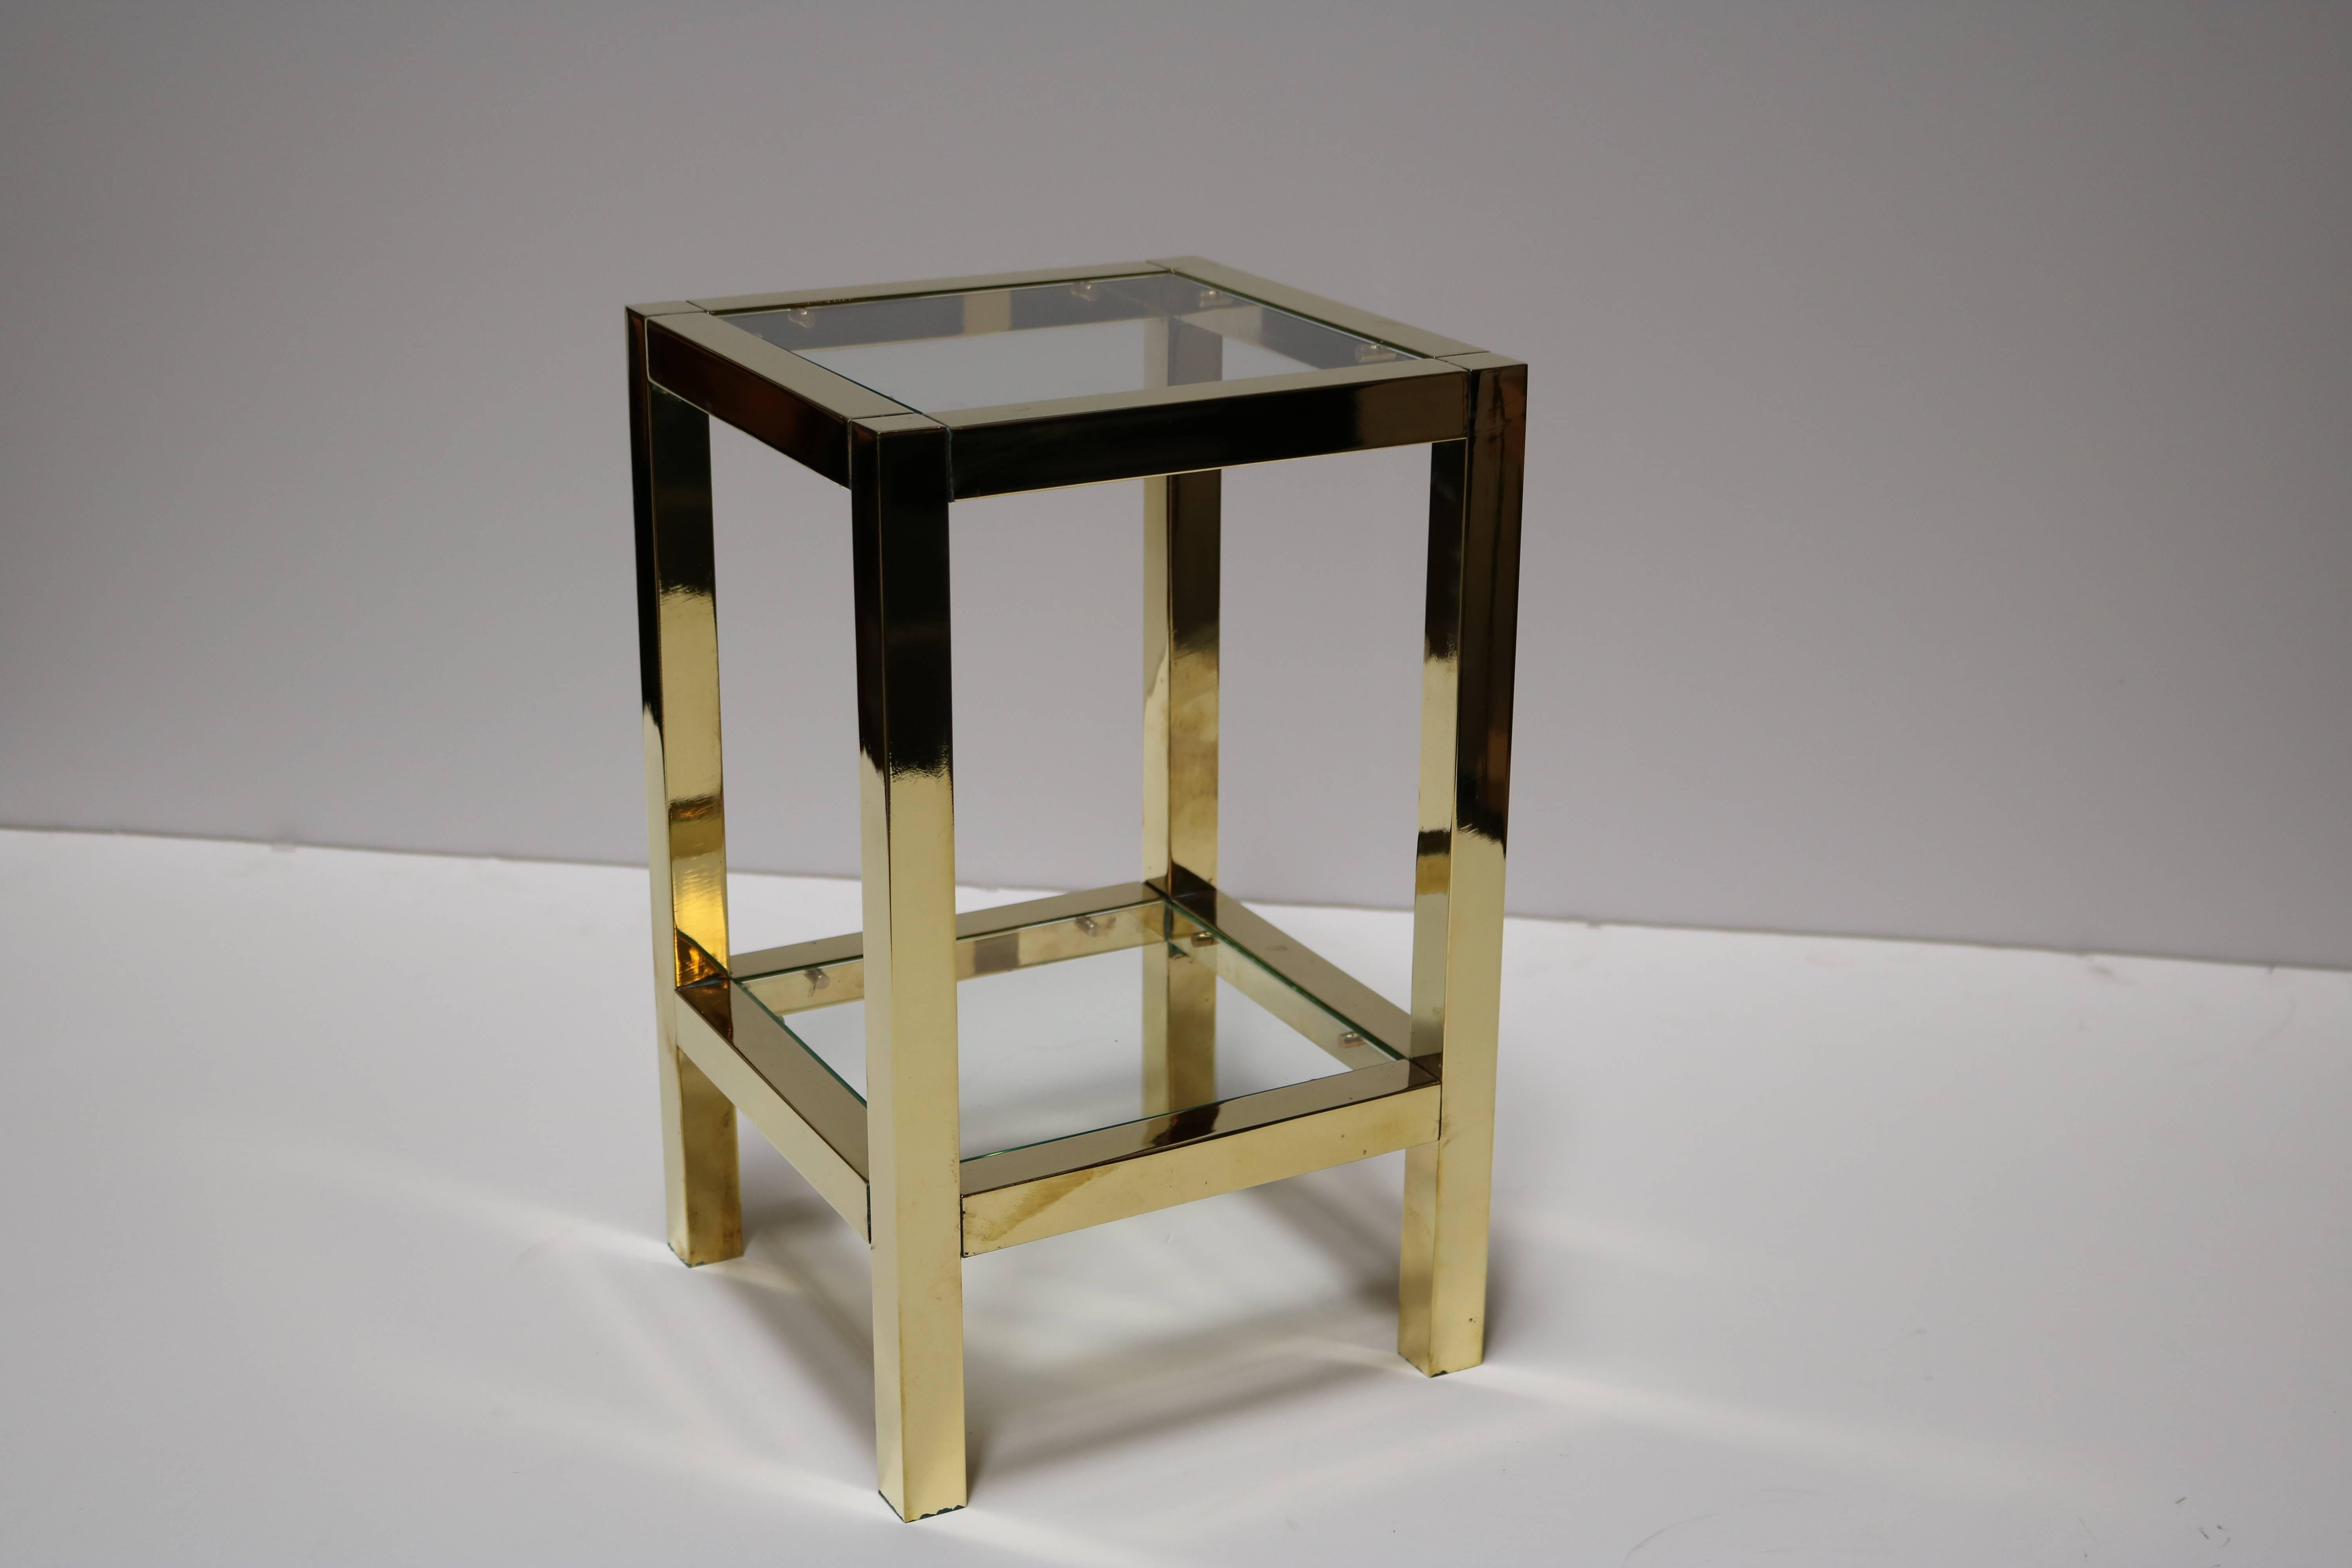 Low brass square shaped side tables each have two glass topped tiers. Tables have been newly refinished and all glass pieces are brand new.
They are perfect to display a tall sculpture.
       